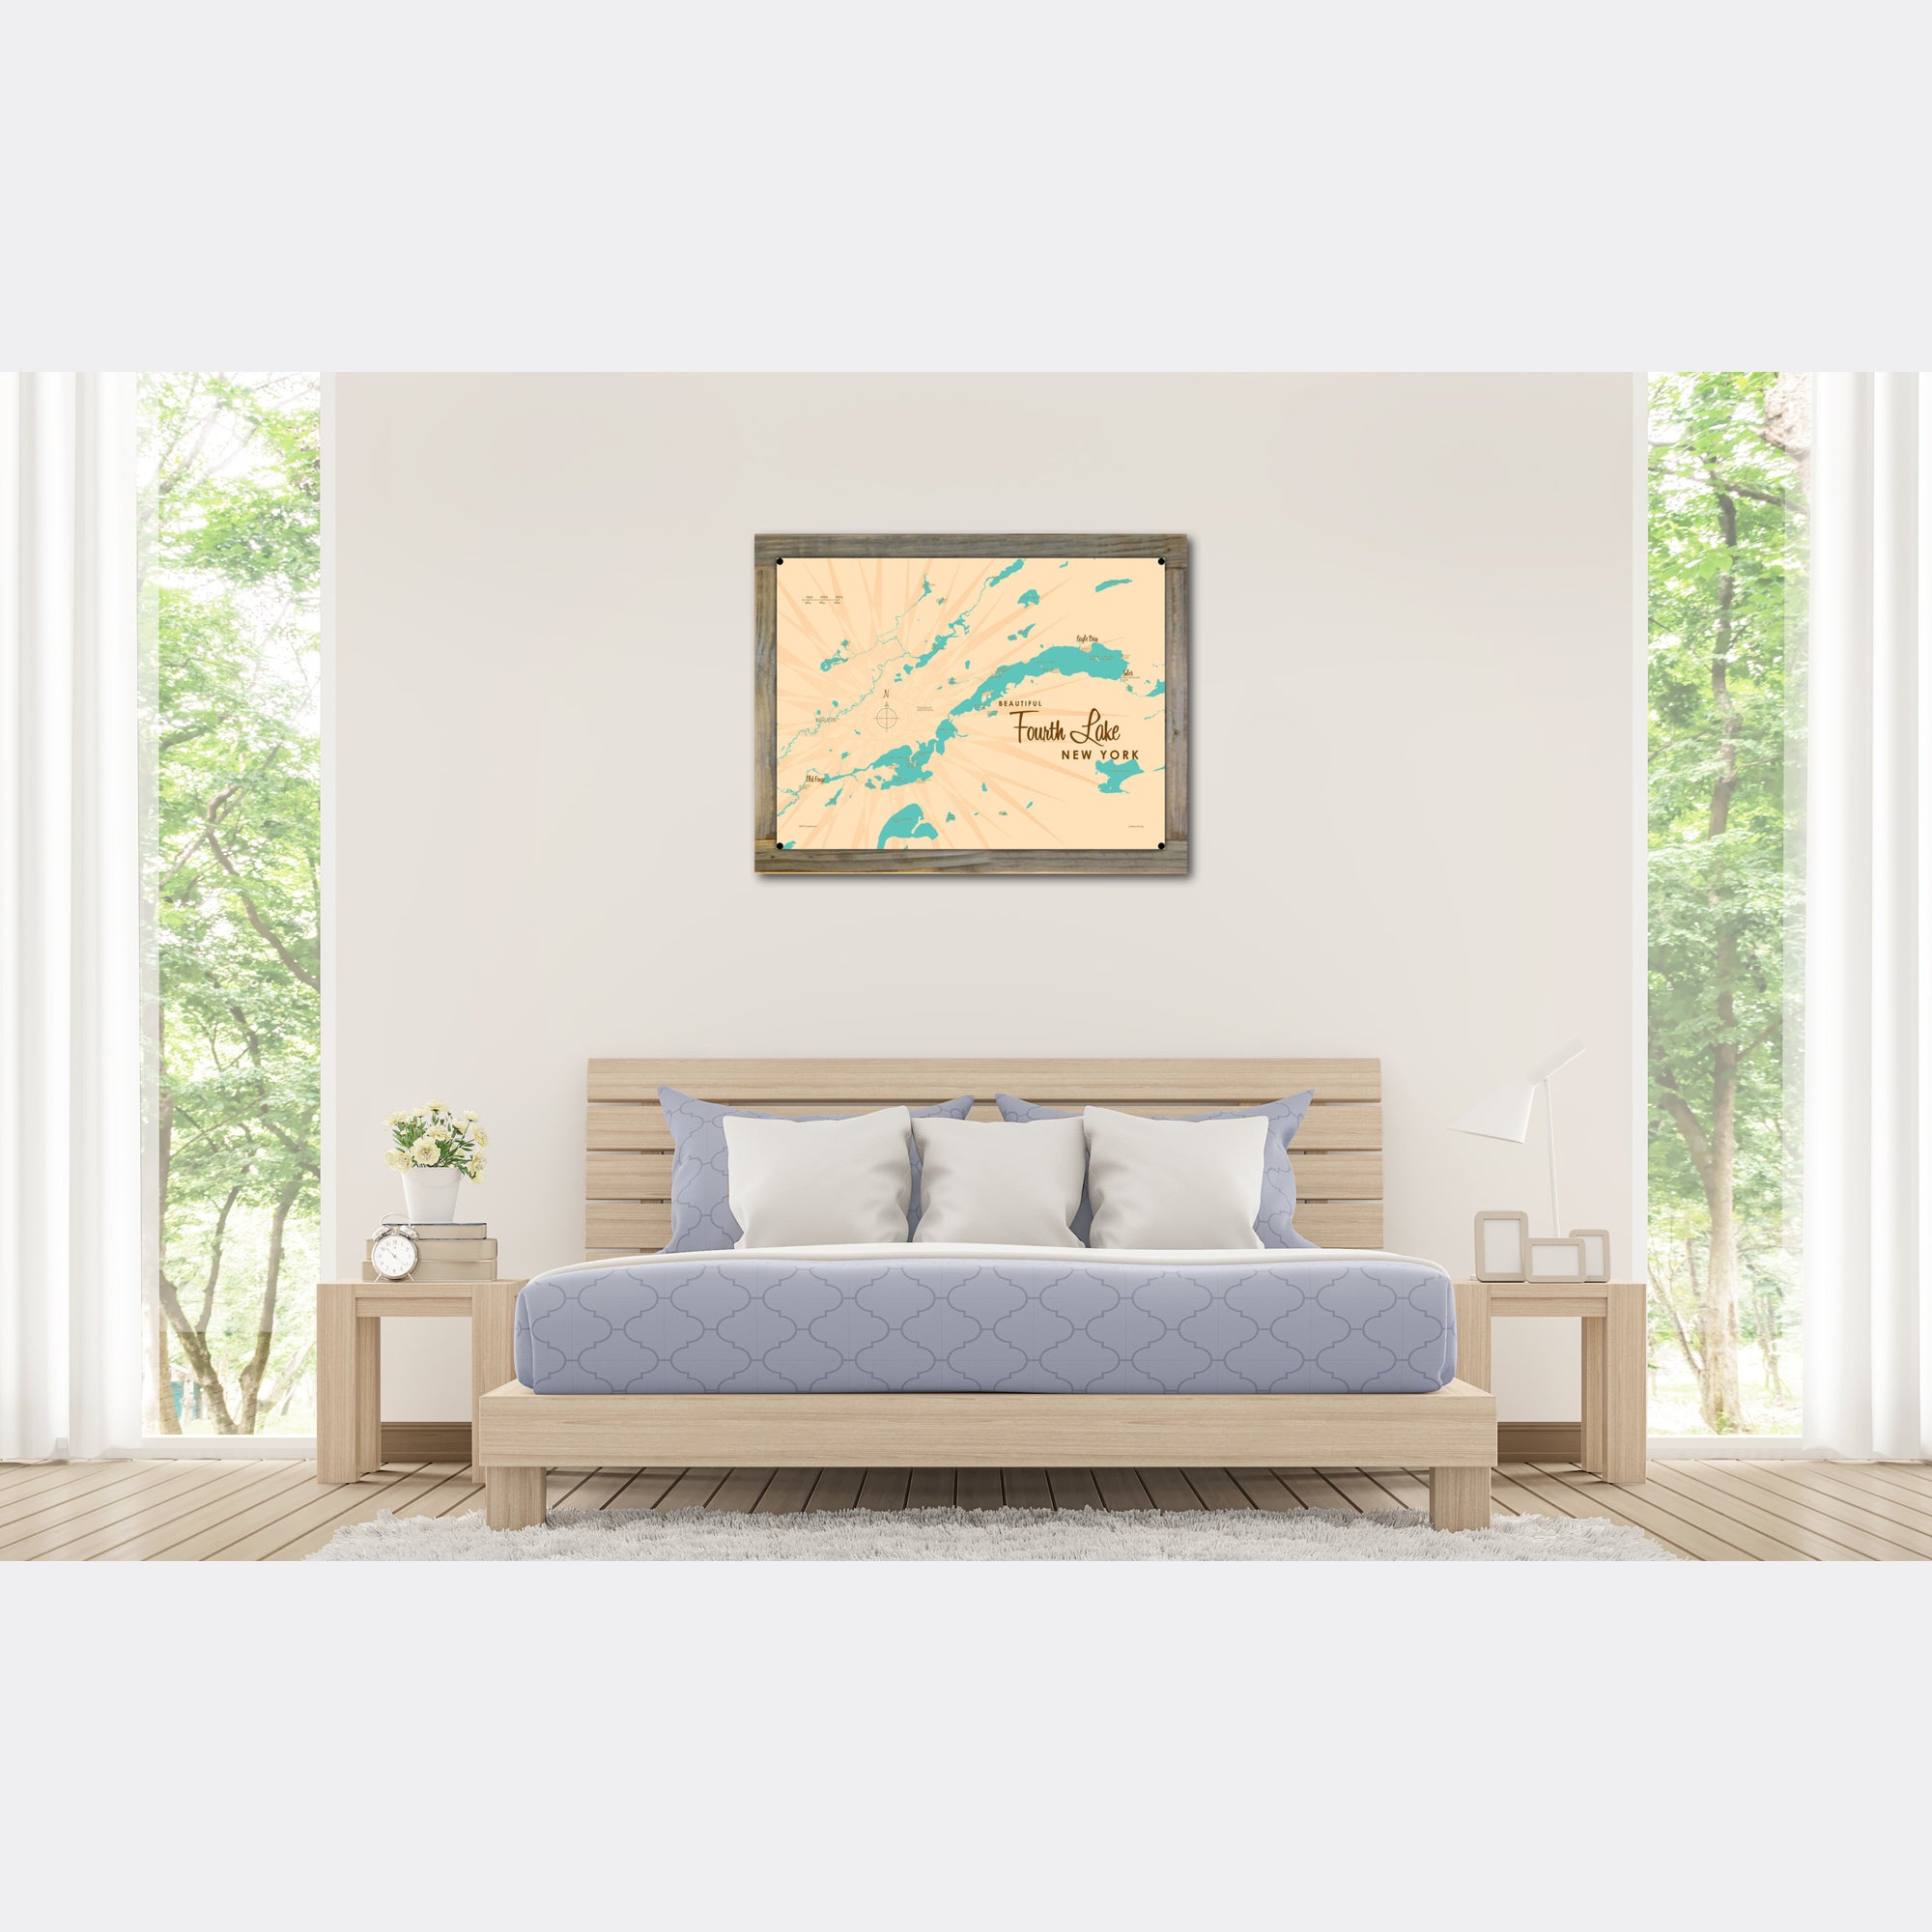 Fourth Lake New York (Herkimer County), Wood-Mounted Metal Sign Map Art